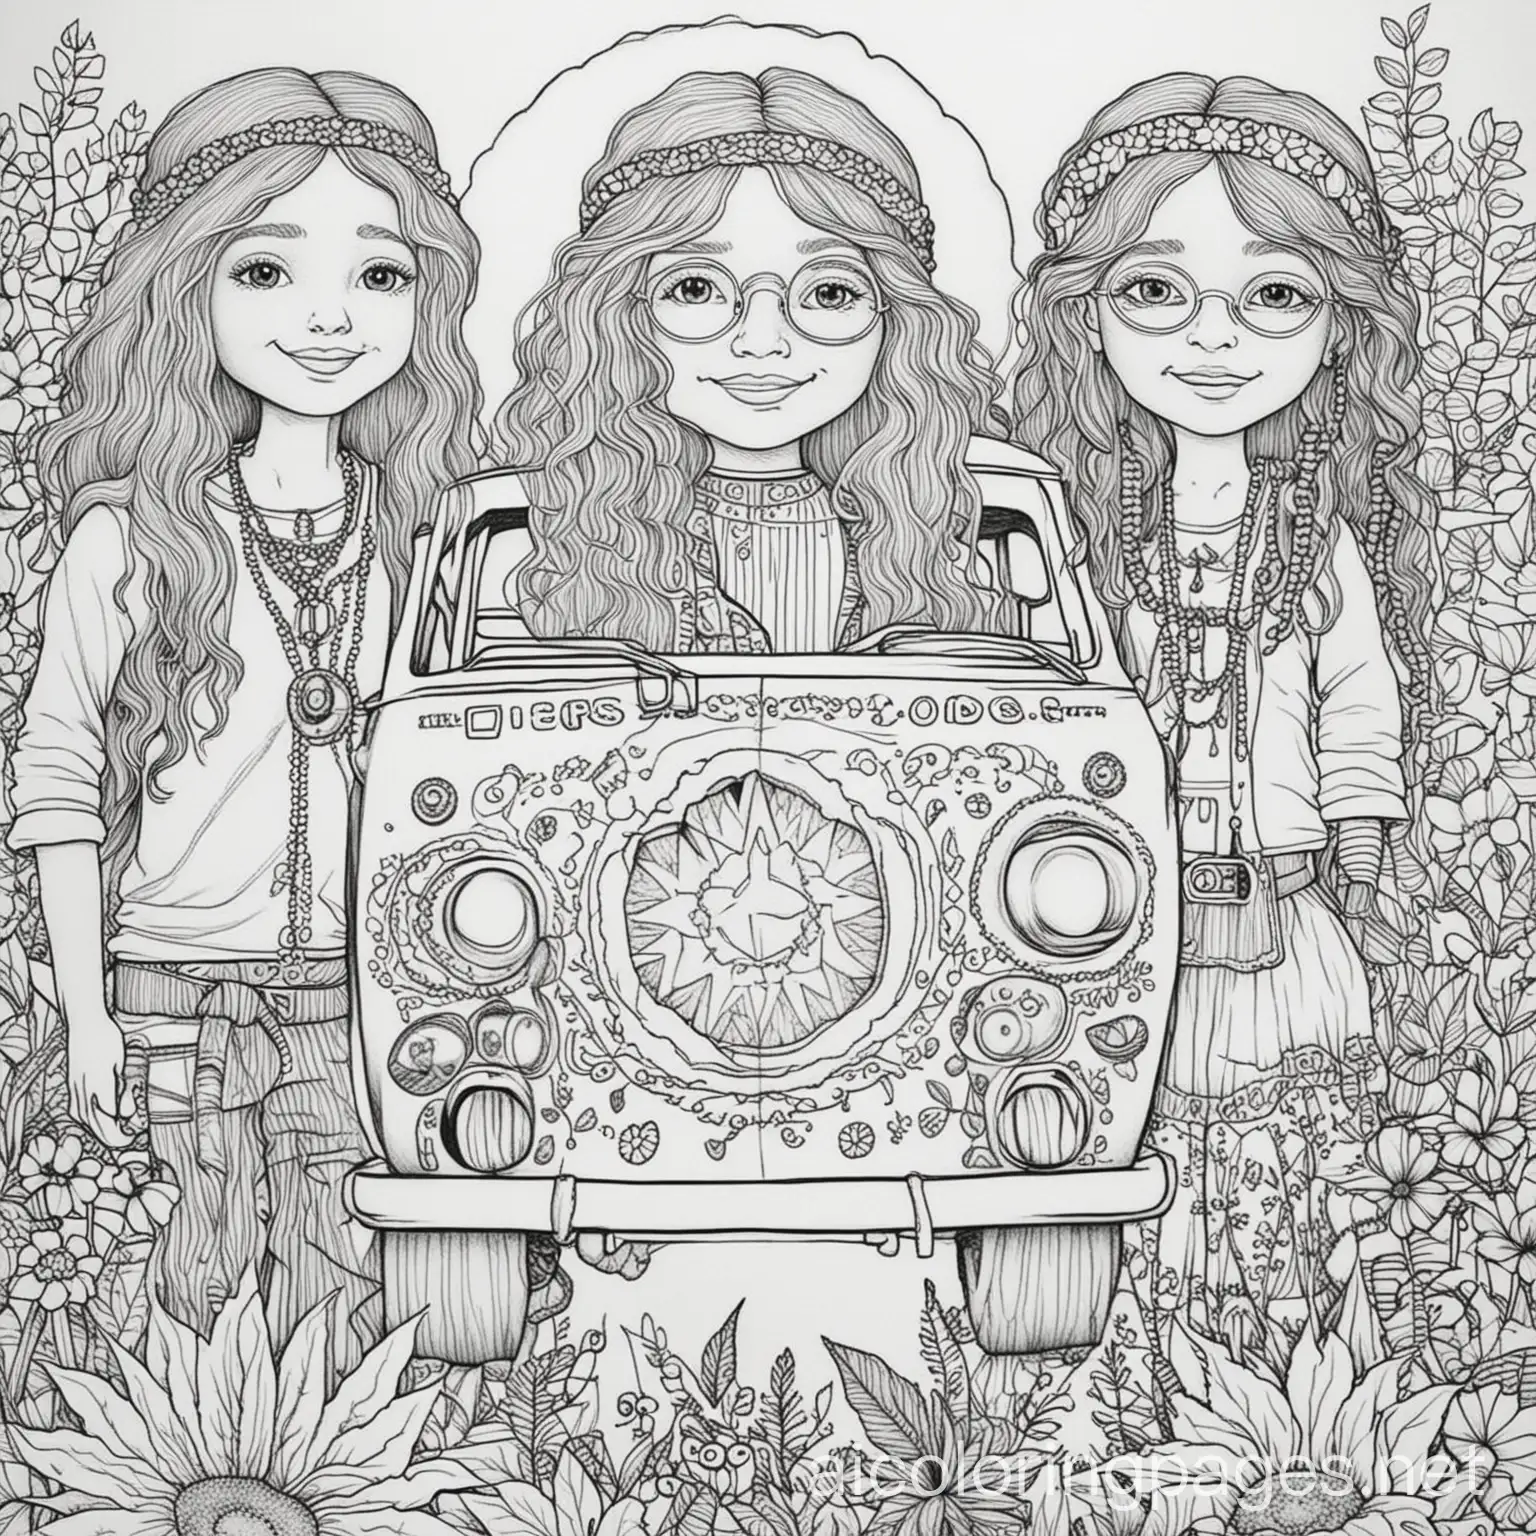 Hippies coloring pages, Coloring Page, black and white, line art, white background, Simplicity, Ample White Space. The background of the coloring page is plain white to make it easy for young children to color within the lines. The outlines of all the subjects are easy to distinguish, making it simple for kids to color without too much difficulty